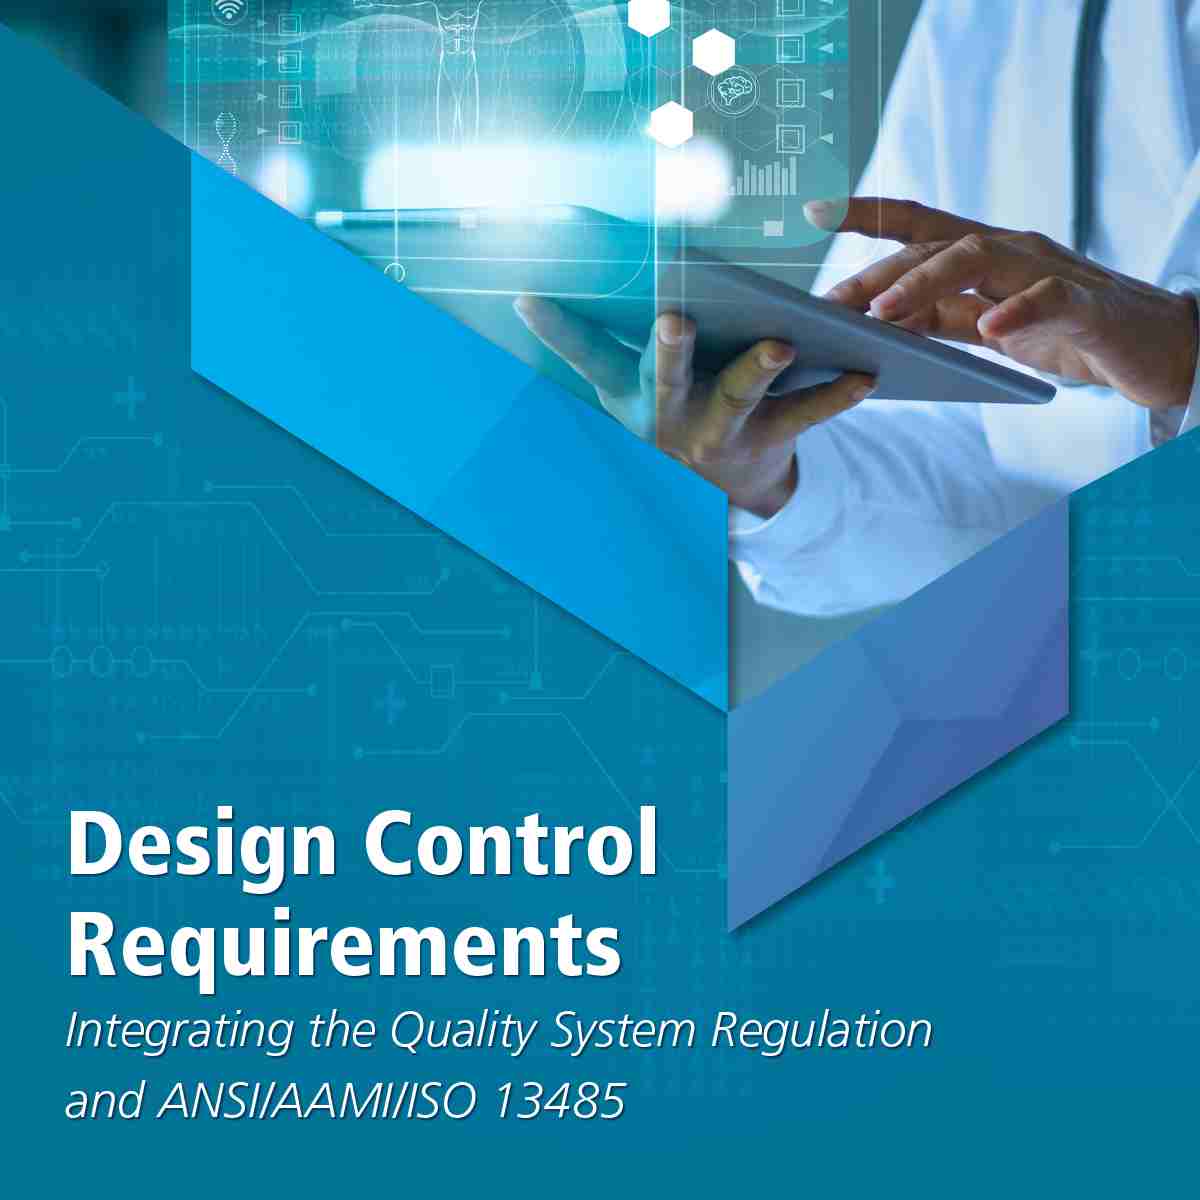 Design Control Requirements – Integrating the Quality System Regulation and ANSI/AAMI/ISO 13485